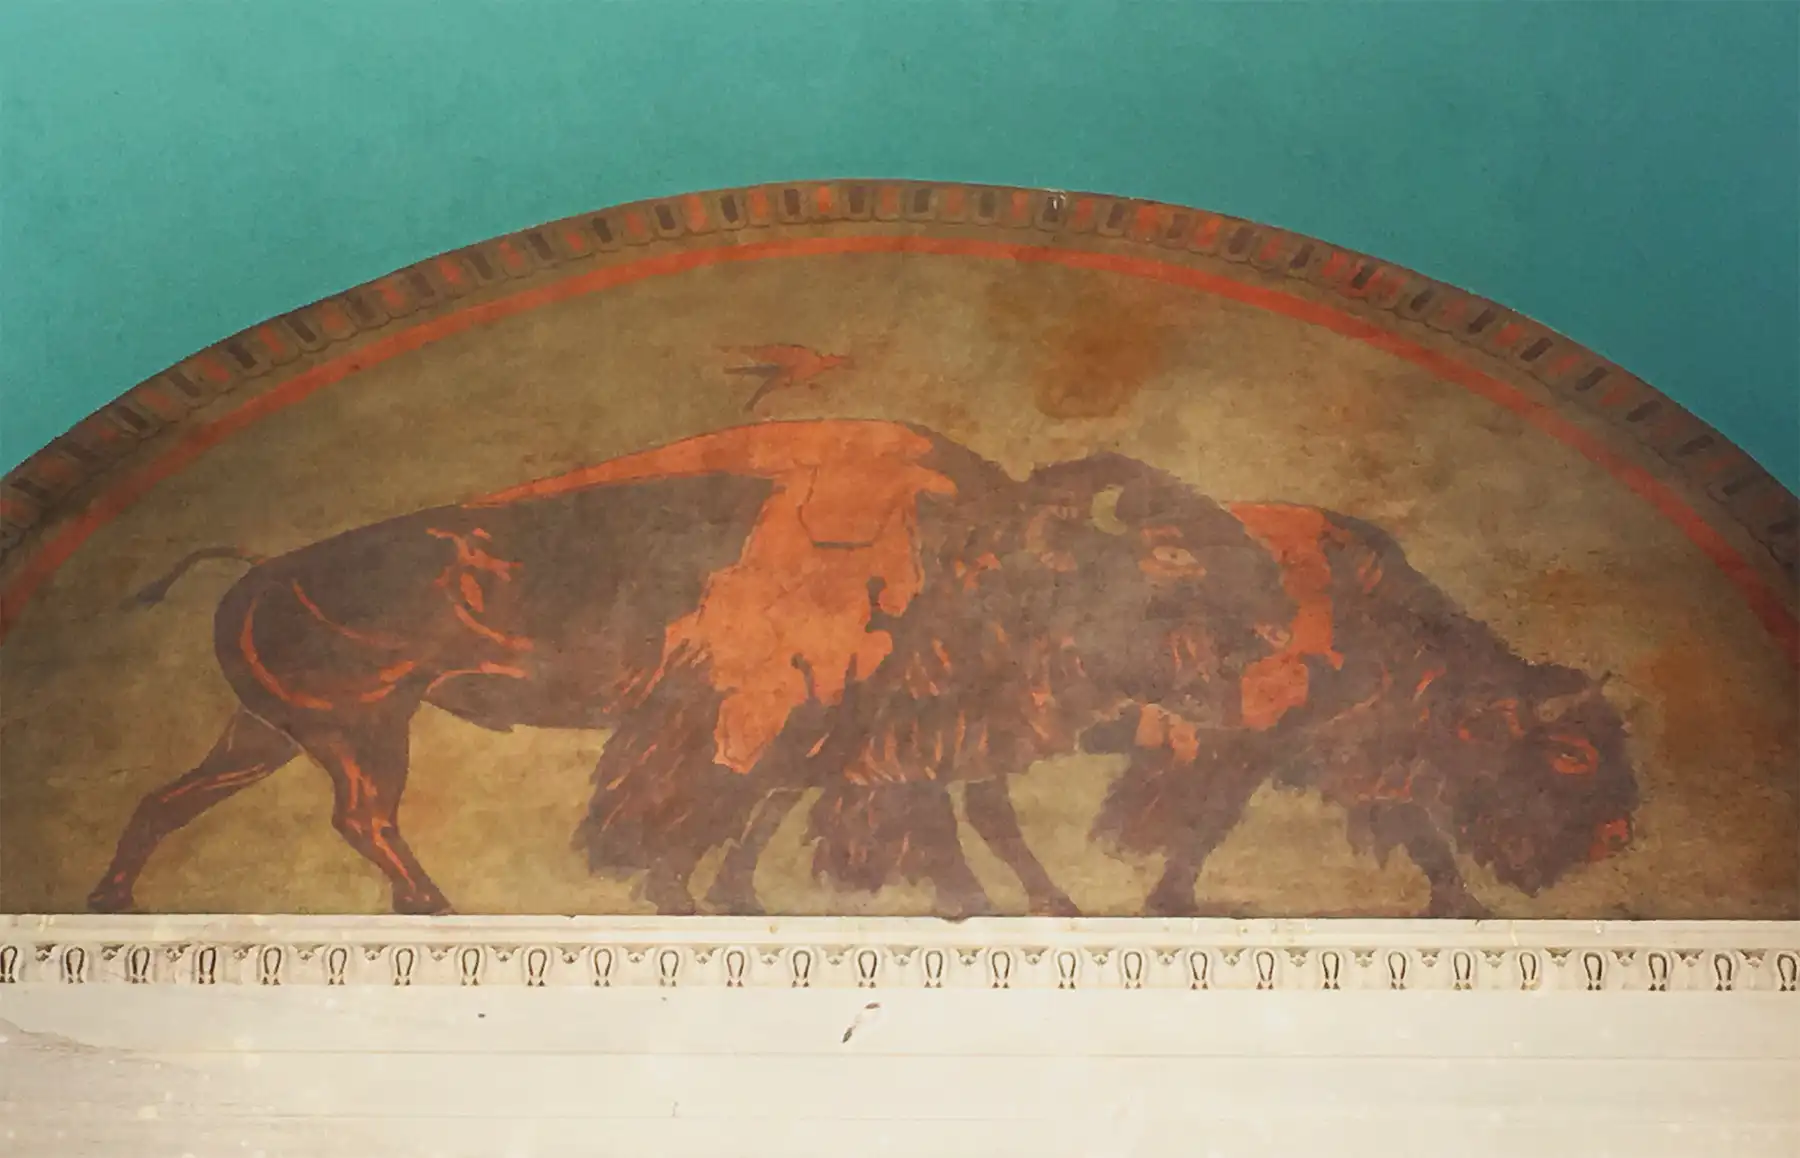 Buffalo mural shows two buffalo in browns and oranges.